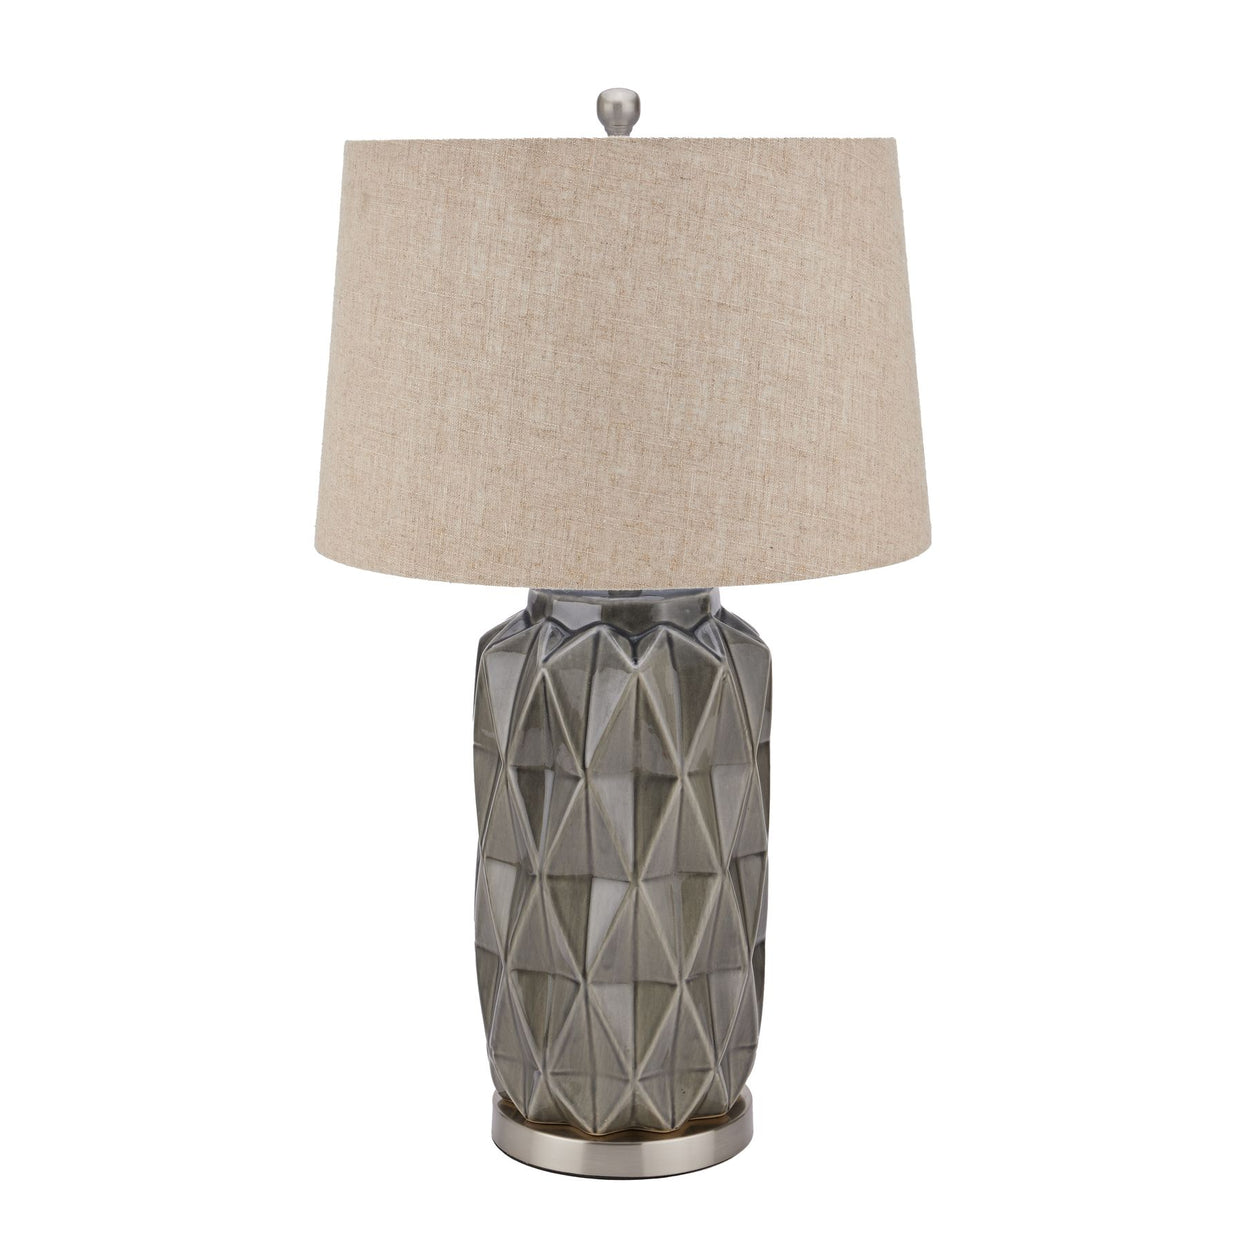 Acantho Ceramic Table Lamp With Linen Shade - Grey For Hill Interiors - HIL-22069